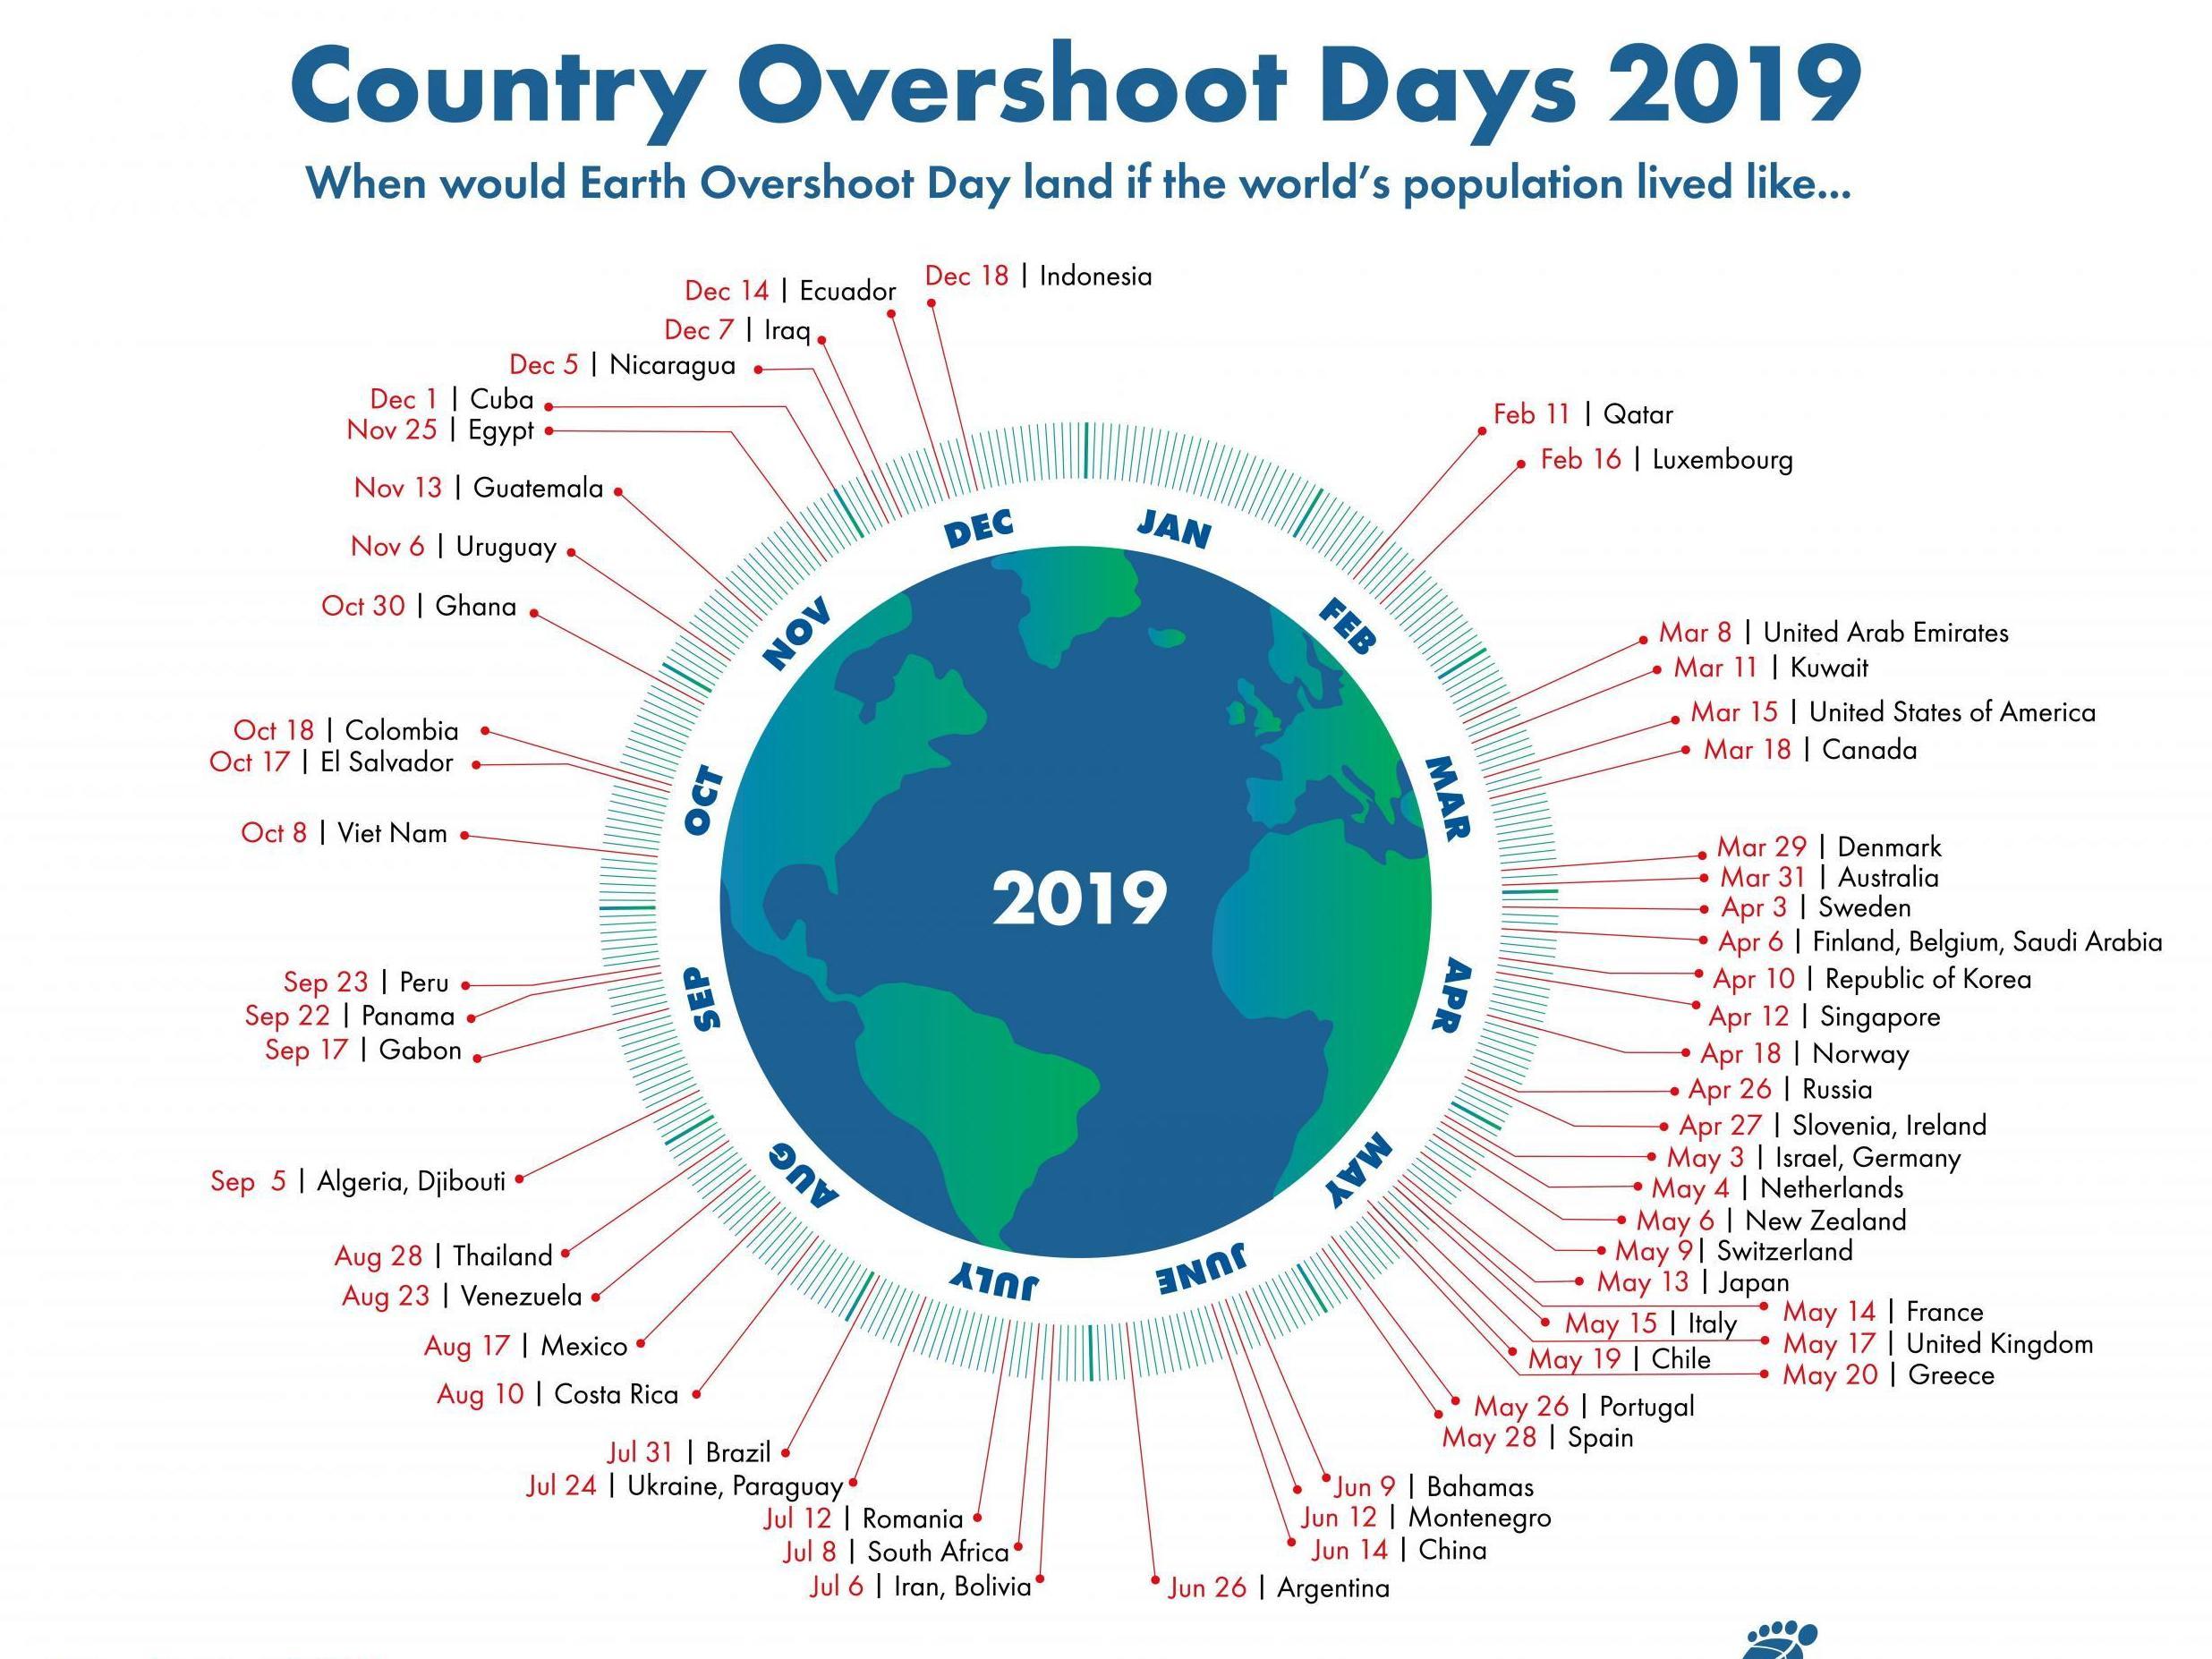 Earth Overshoot Day was marked on 2 August in 2017, 1 August in 2018 and now it has gone back again to 29 July